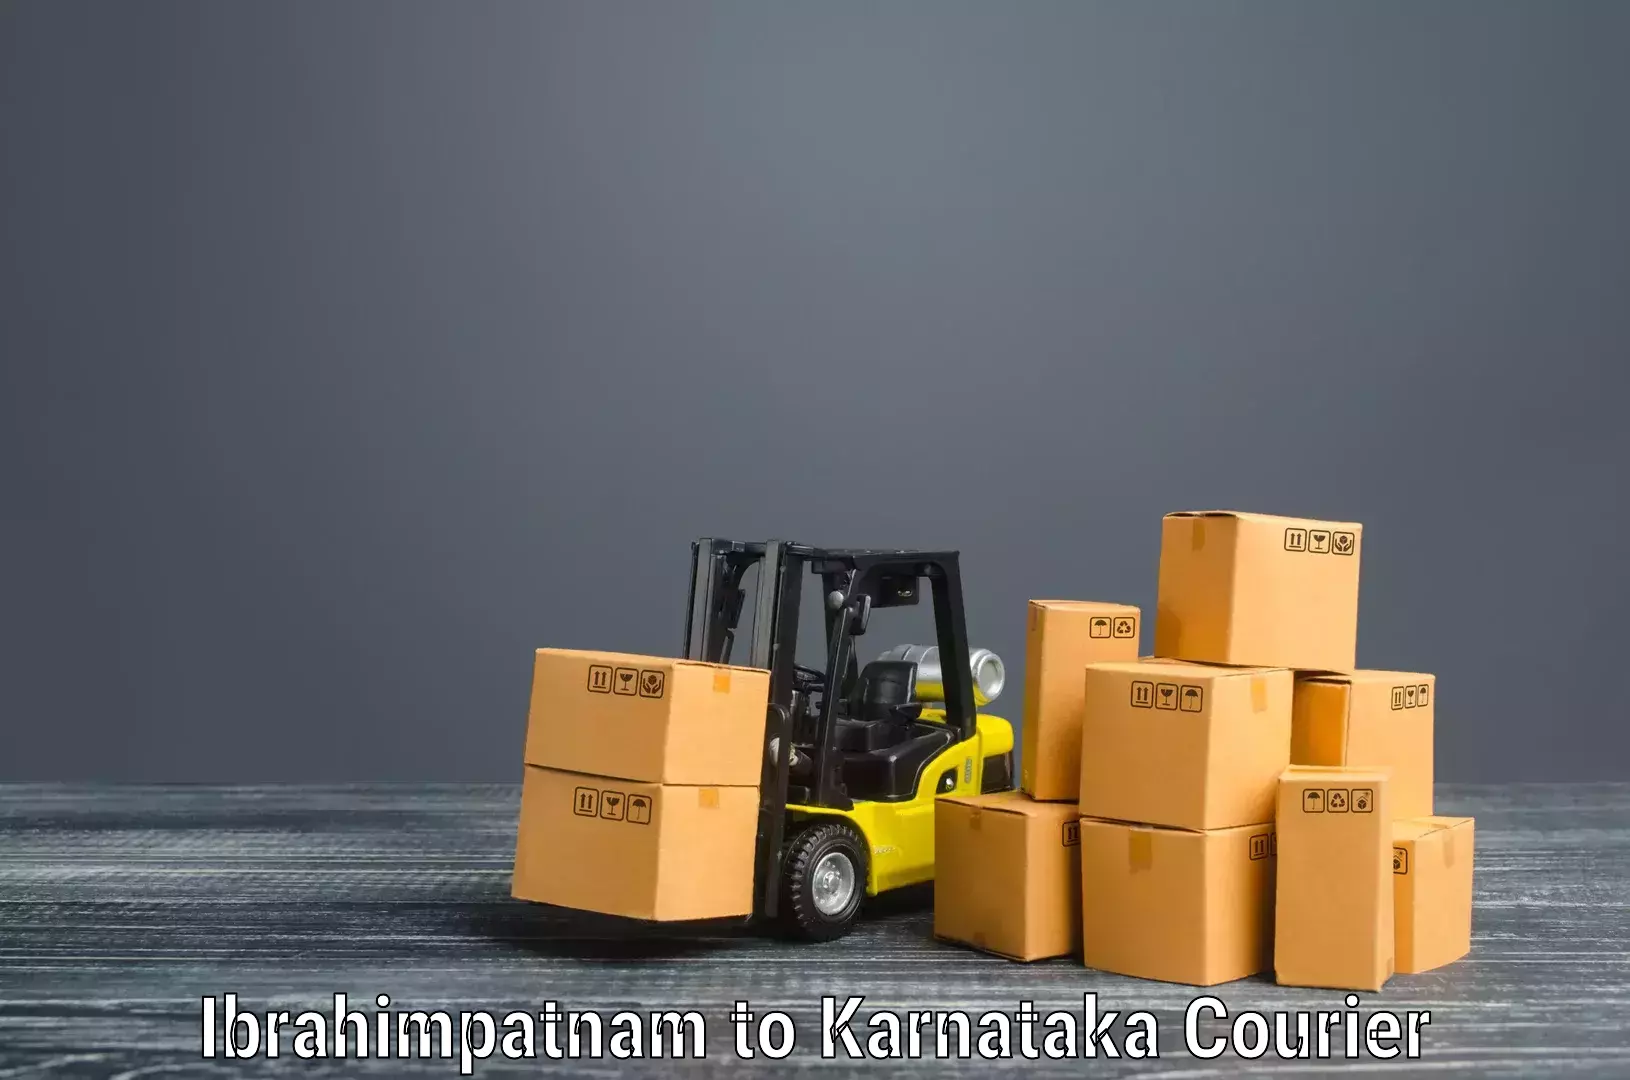 Furniture transport service Ibrahimpatnam to Manipal Academy of Higher Education